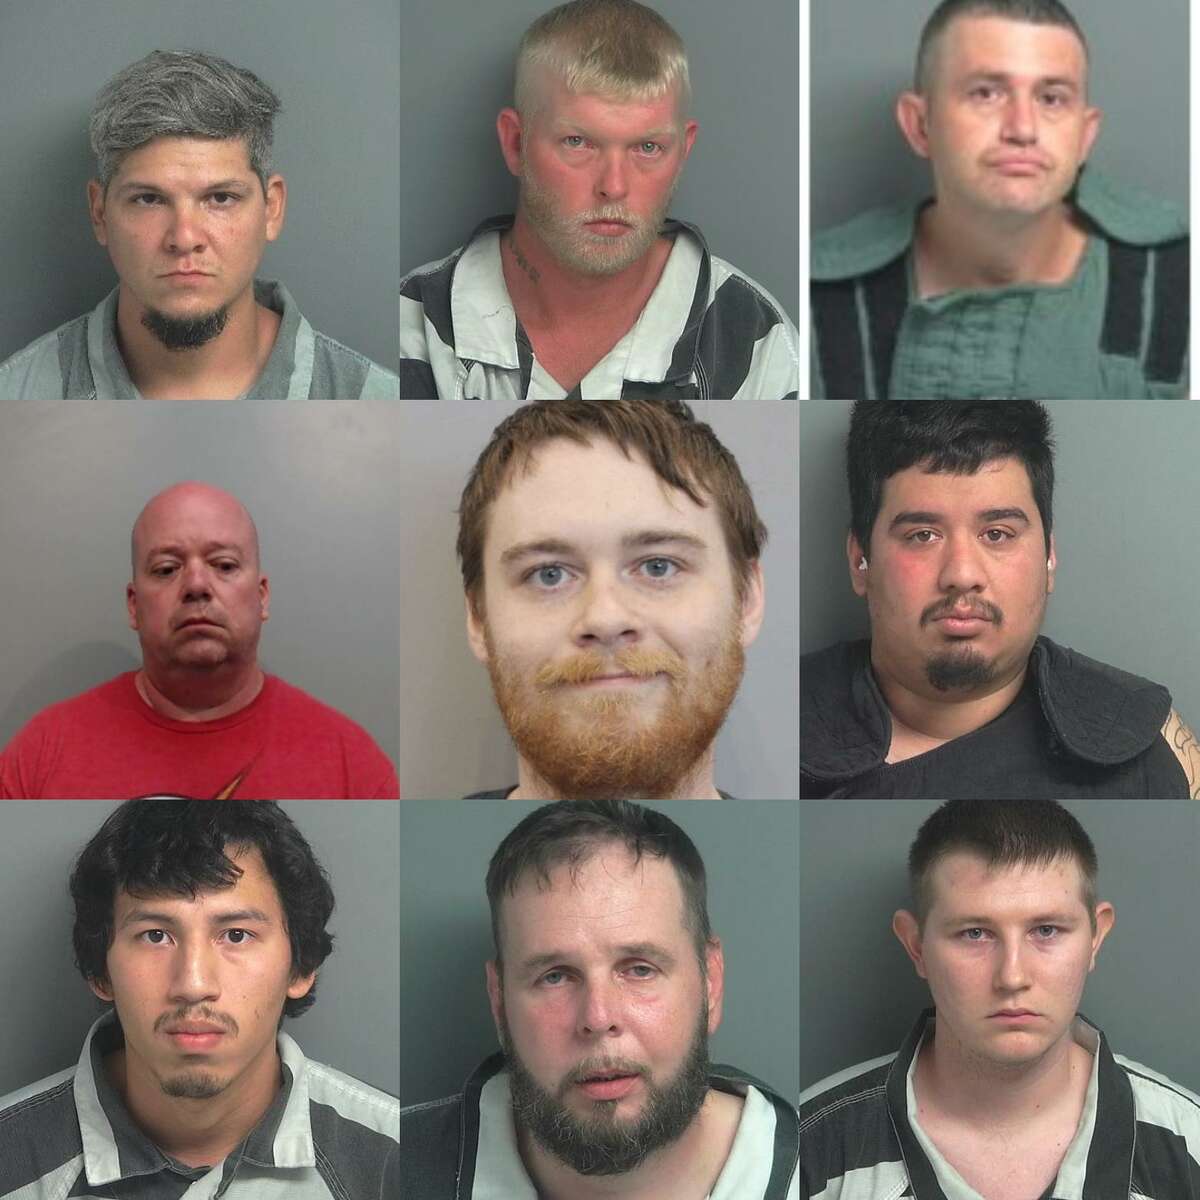 The Montgomery County Precinct 1 Constable's Office took 10 men into custody during April and May for alleged sex crimes against children in an online investigation that was part of the annual Operation Broken Heart.